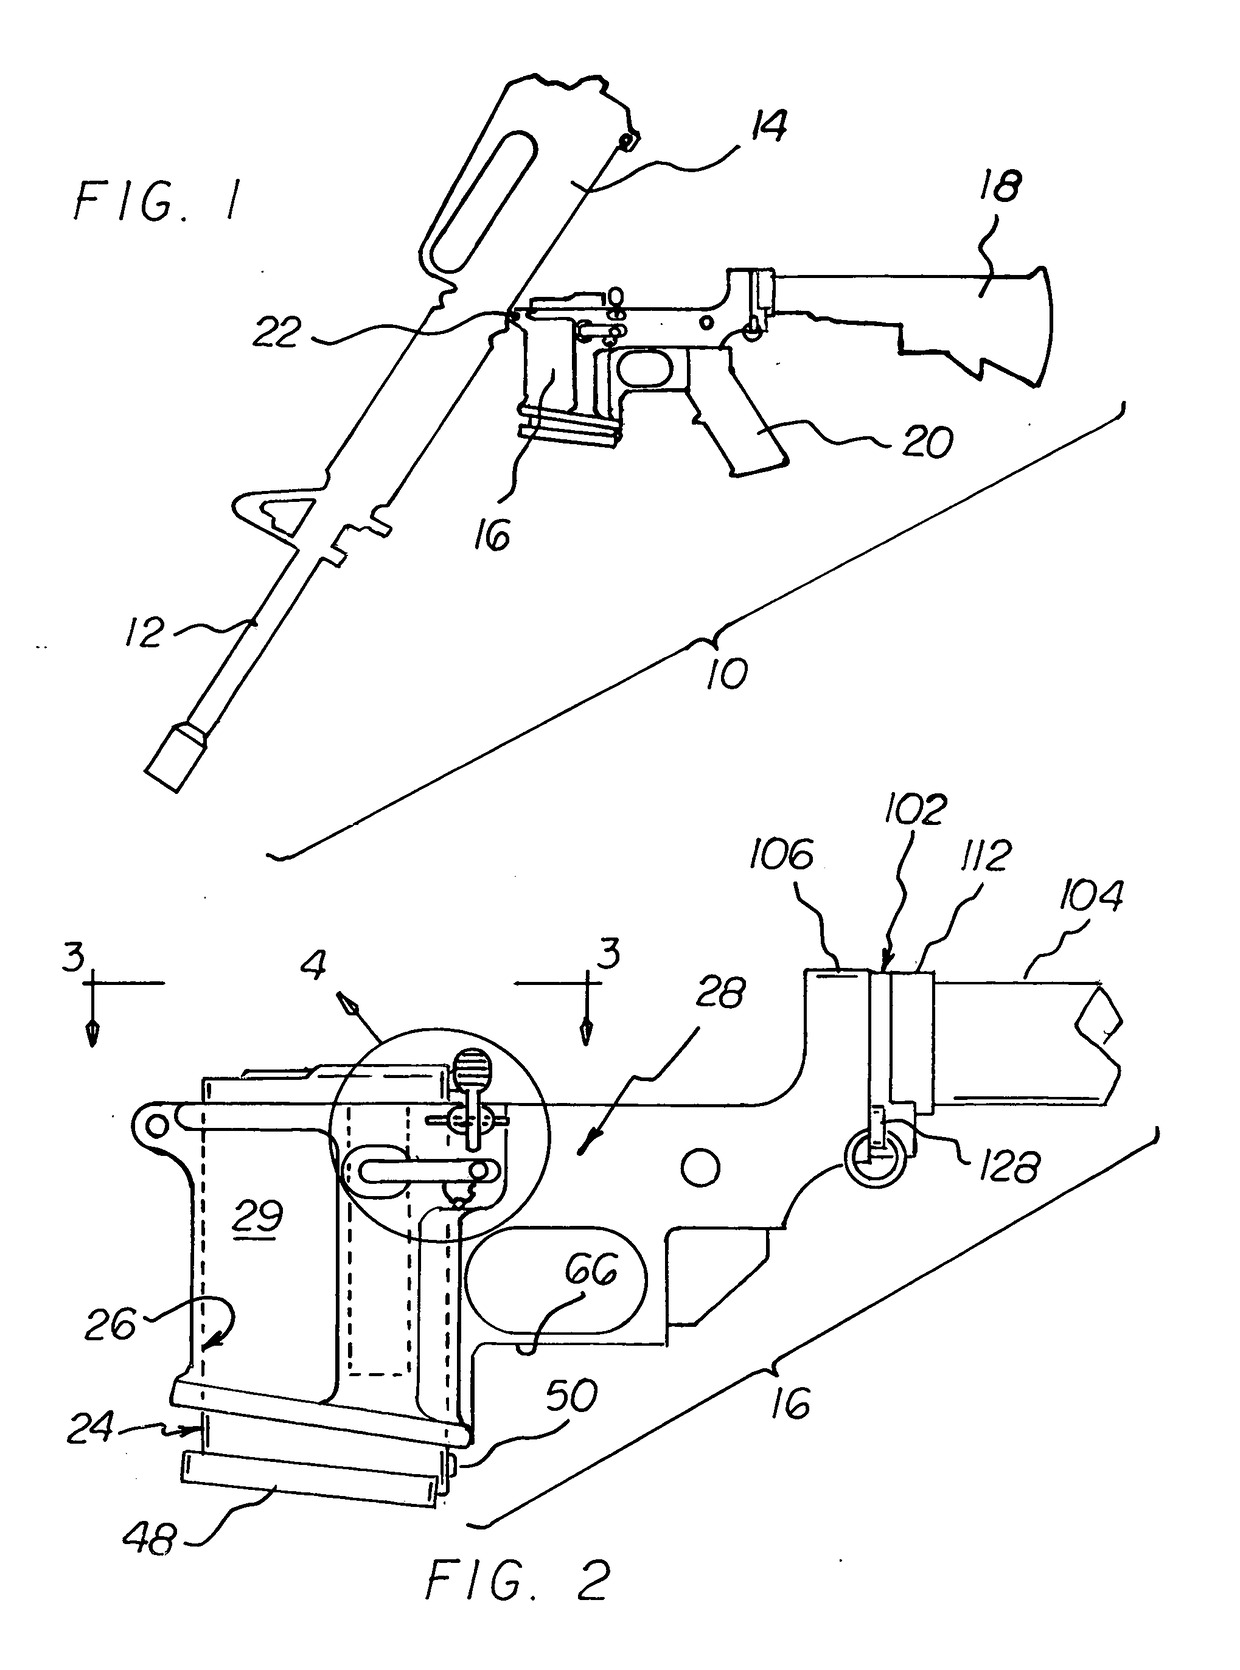 Firearm lower receiver with non-detachable magazine